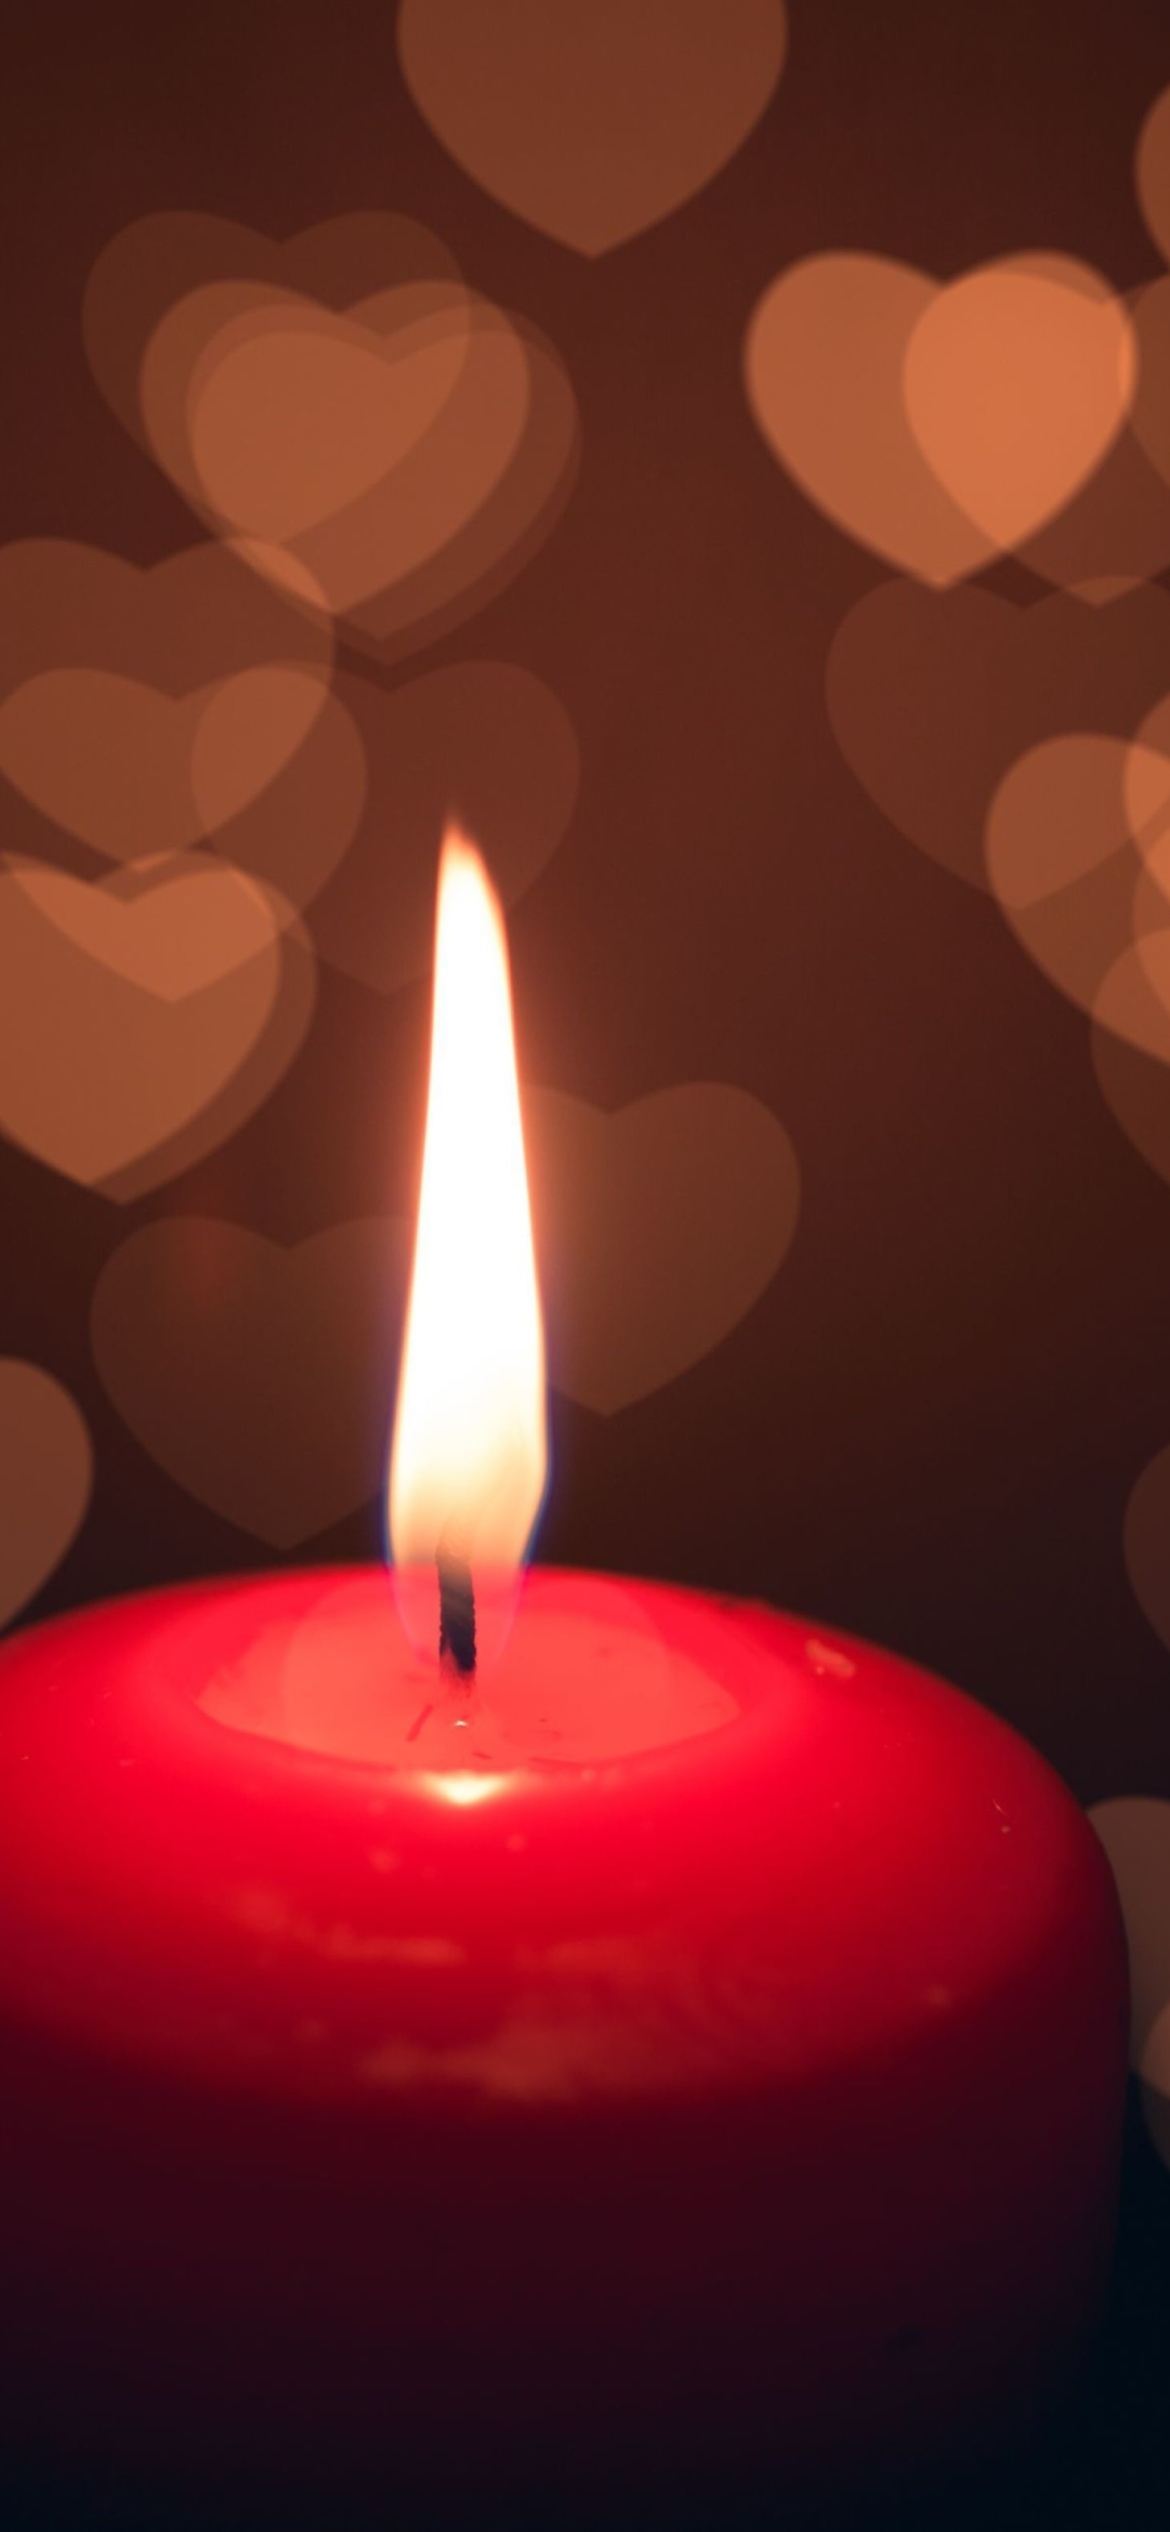 Love Candle wallpaper 1170x2532